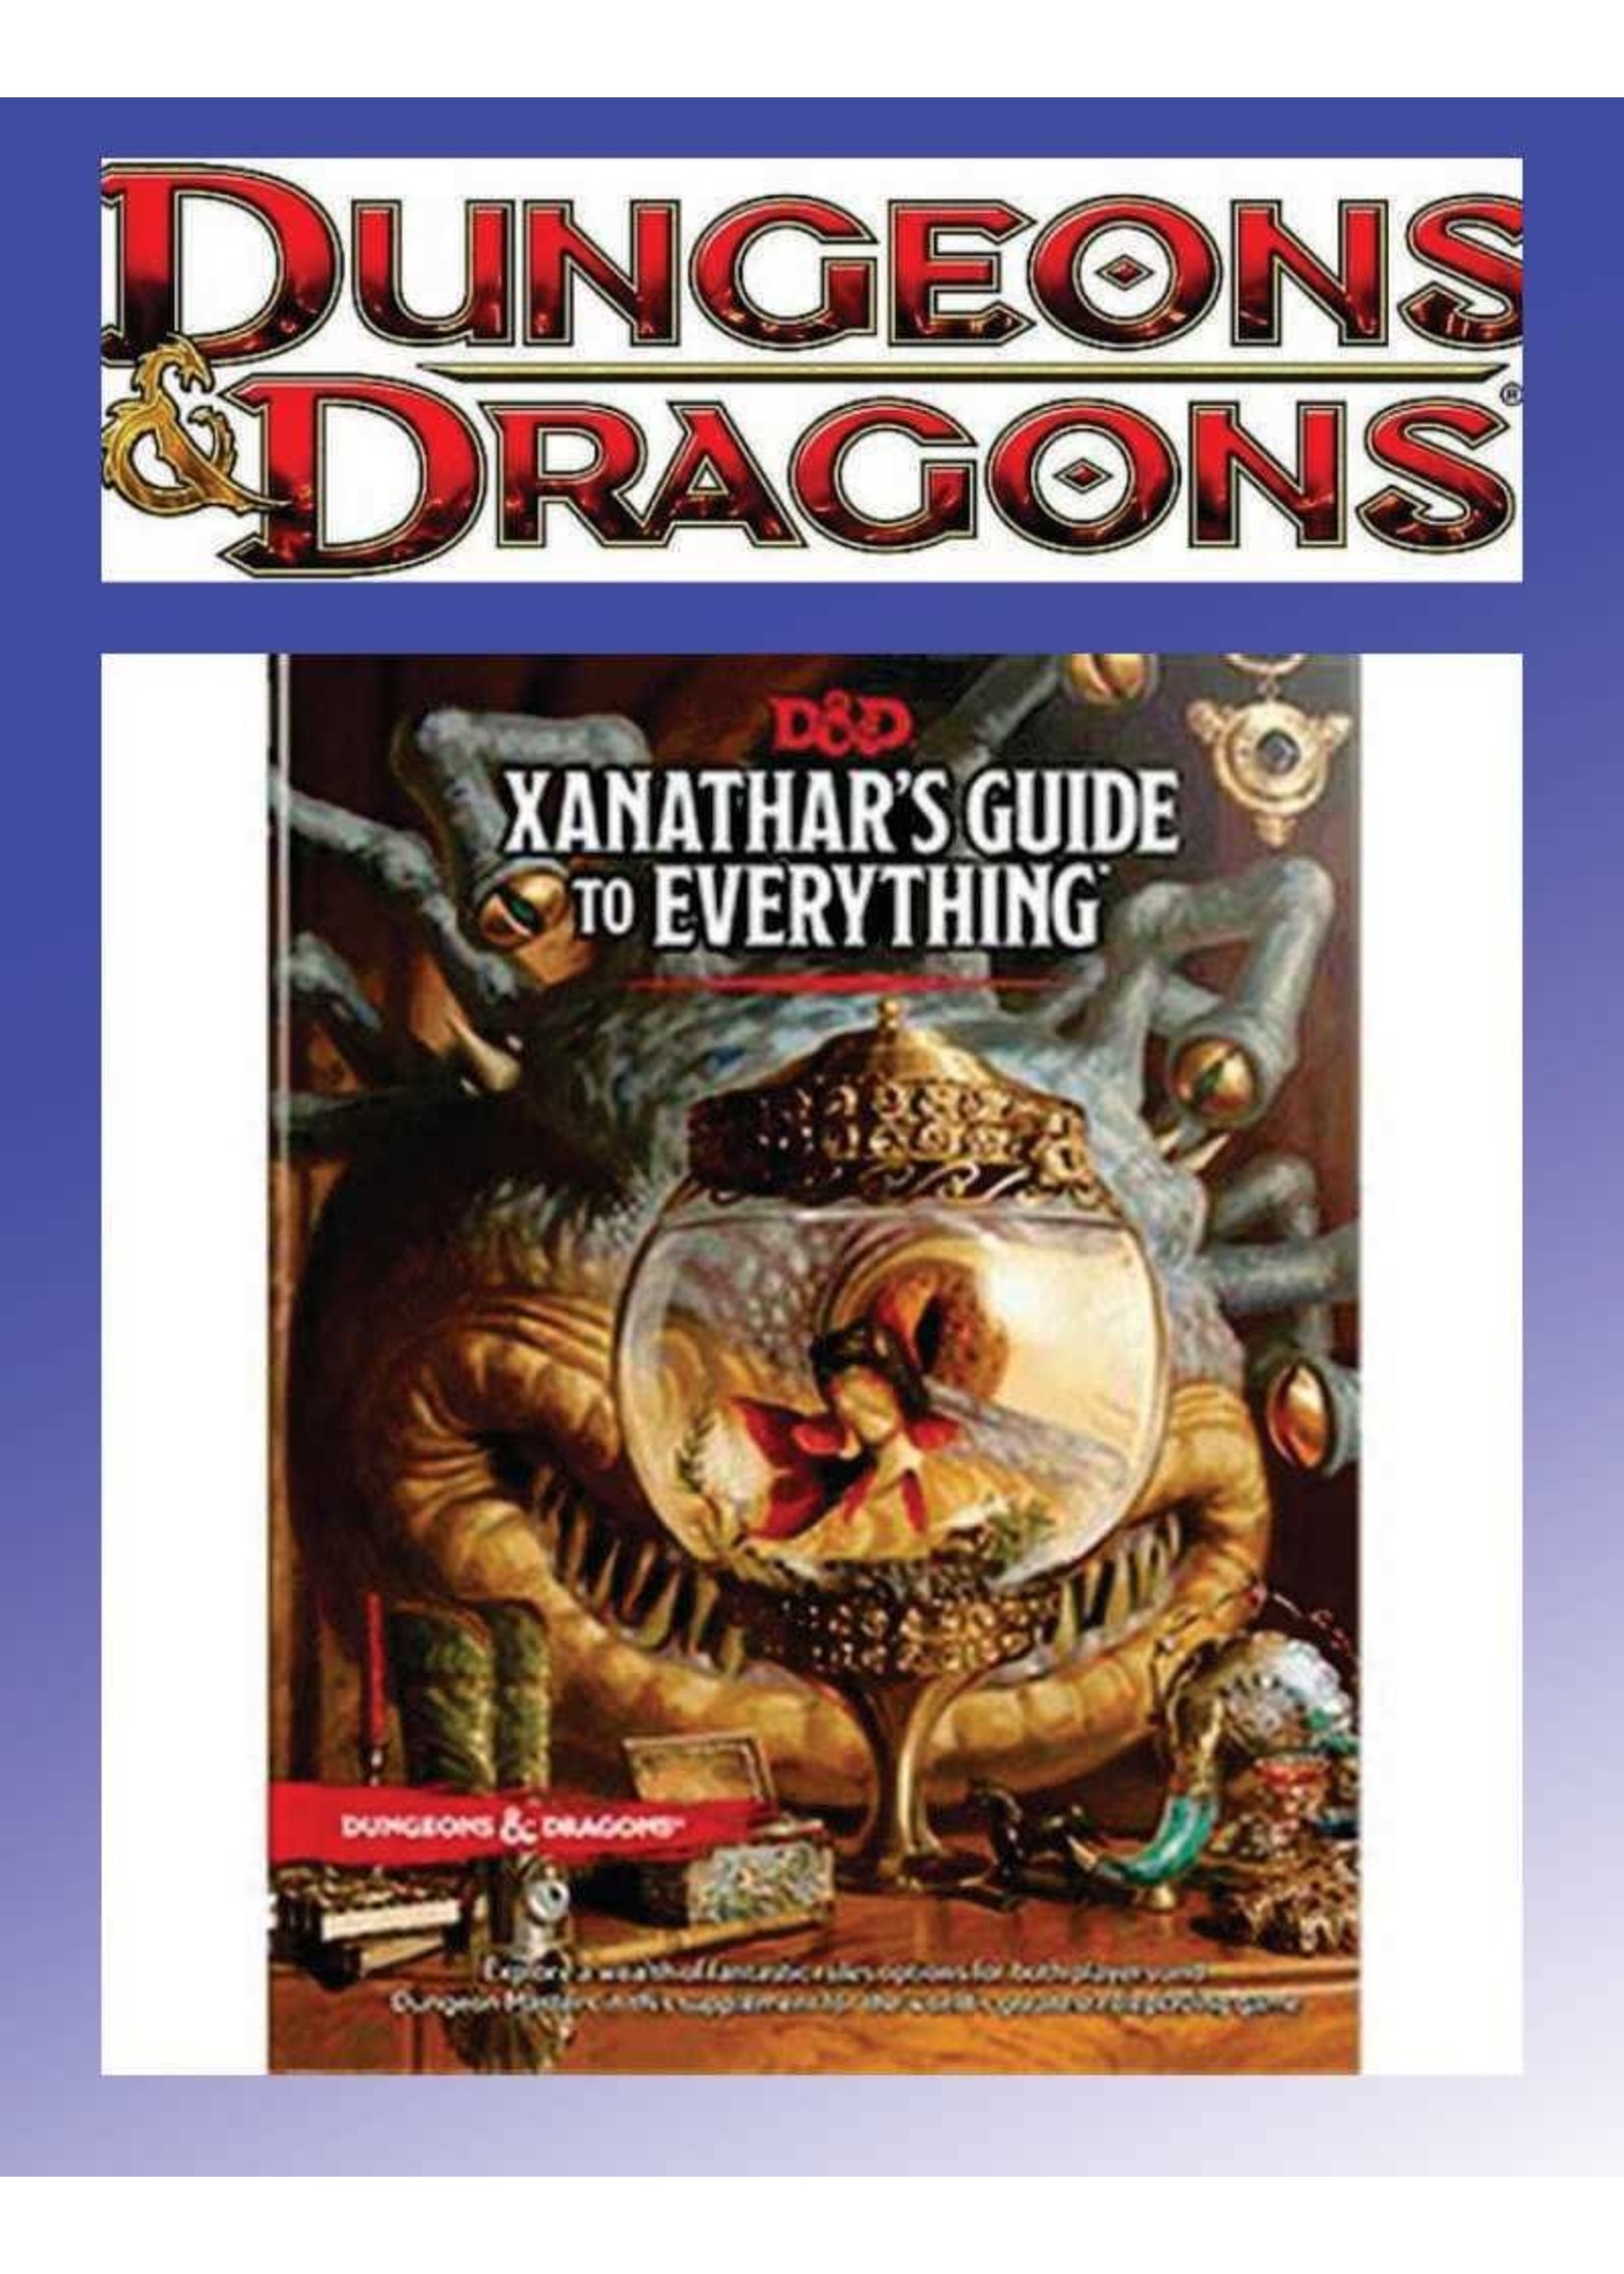 Dungeons and Dragons D&D 5E: Xanathar's Guide to Everything